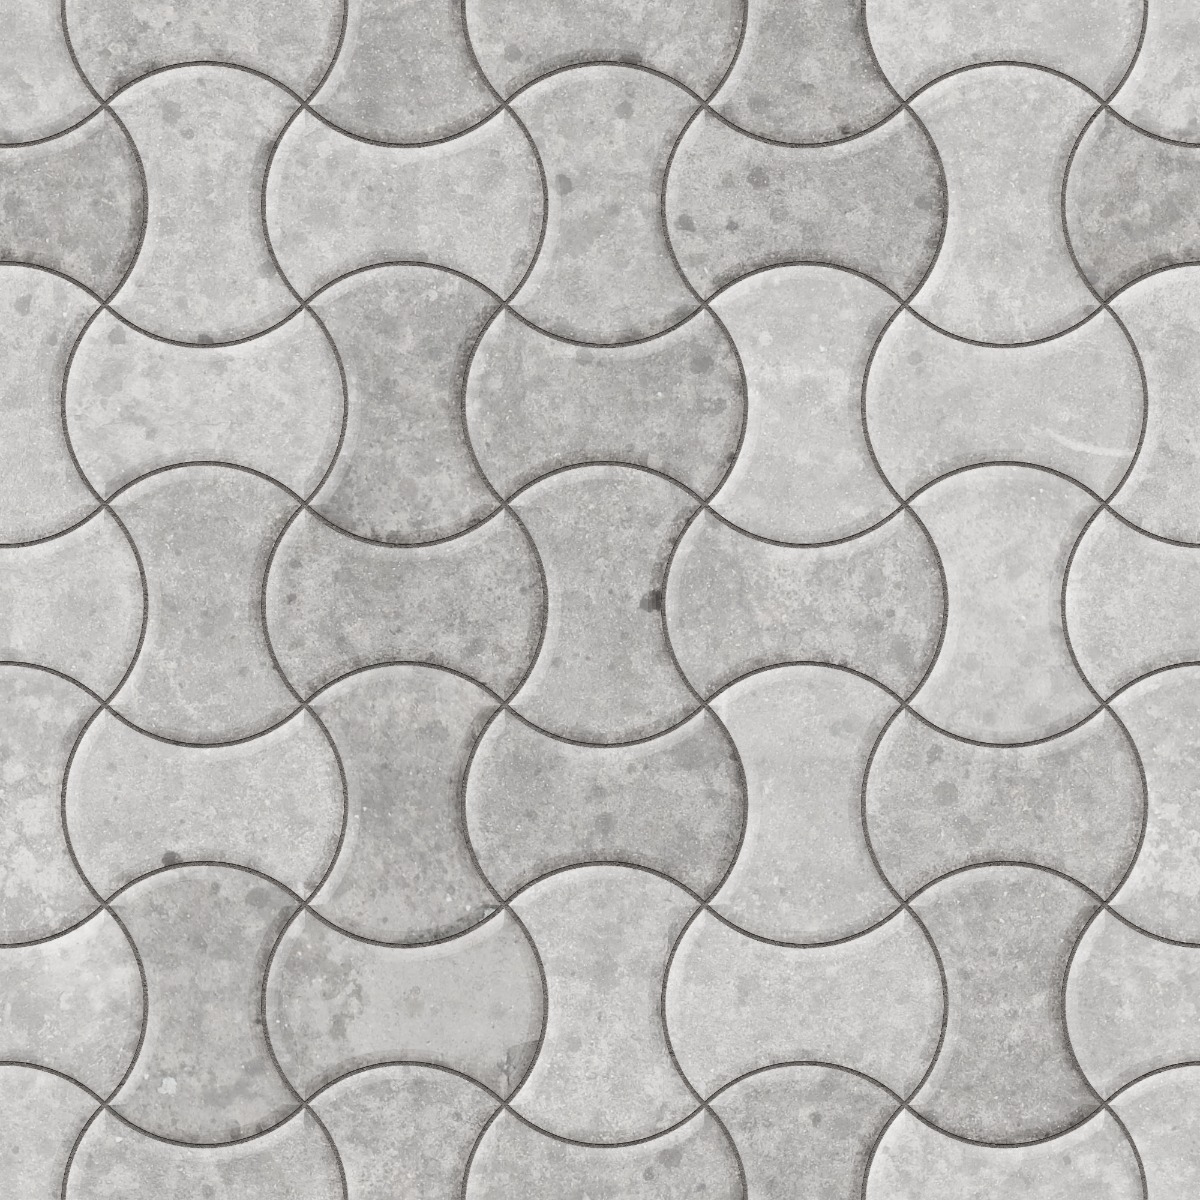 A seamless concrete texture with concrete blocks arranged in a Hourglass pattern